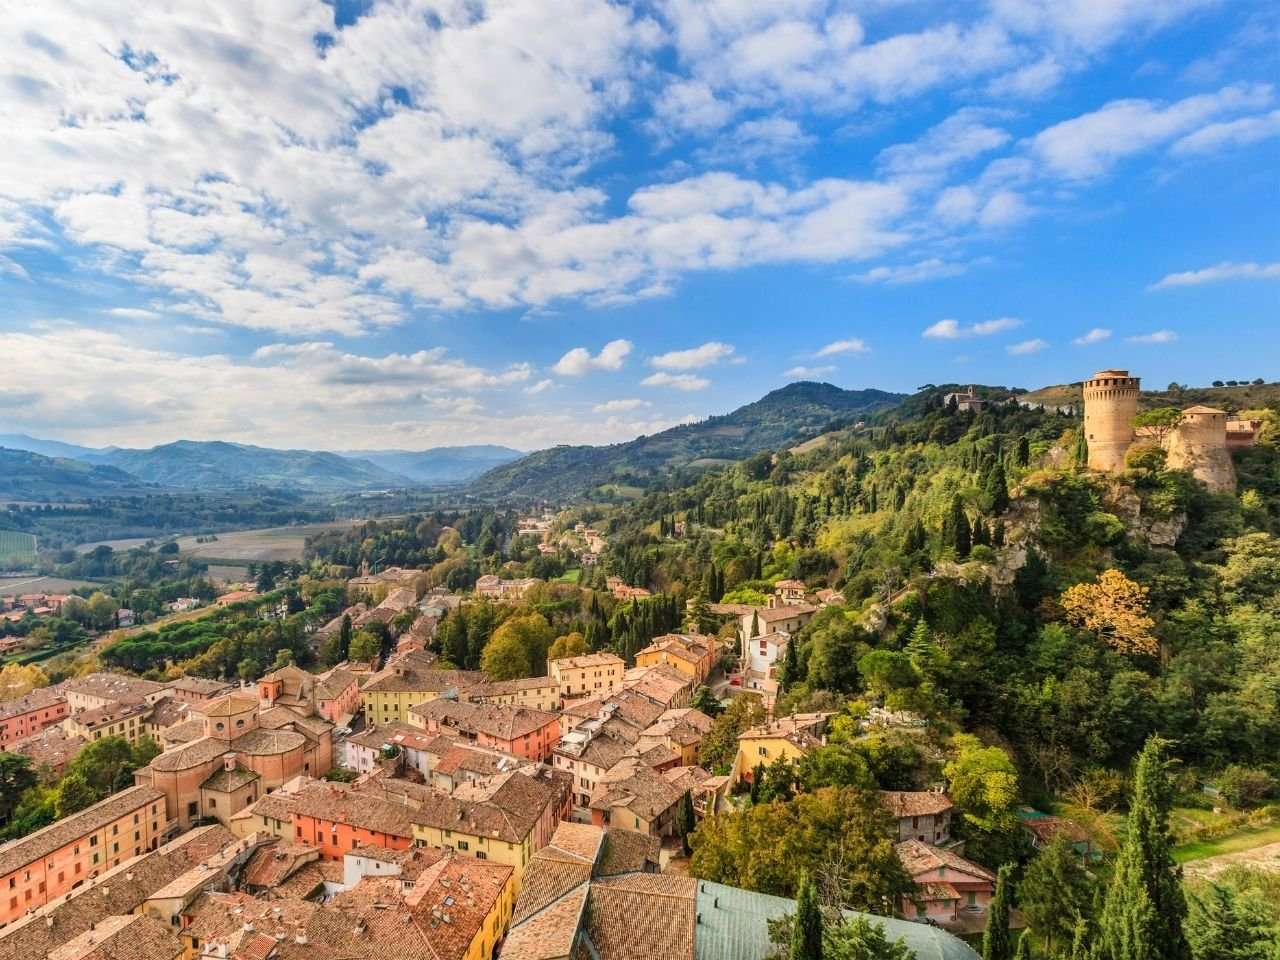 Things to do in Brisighella